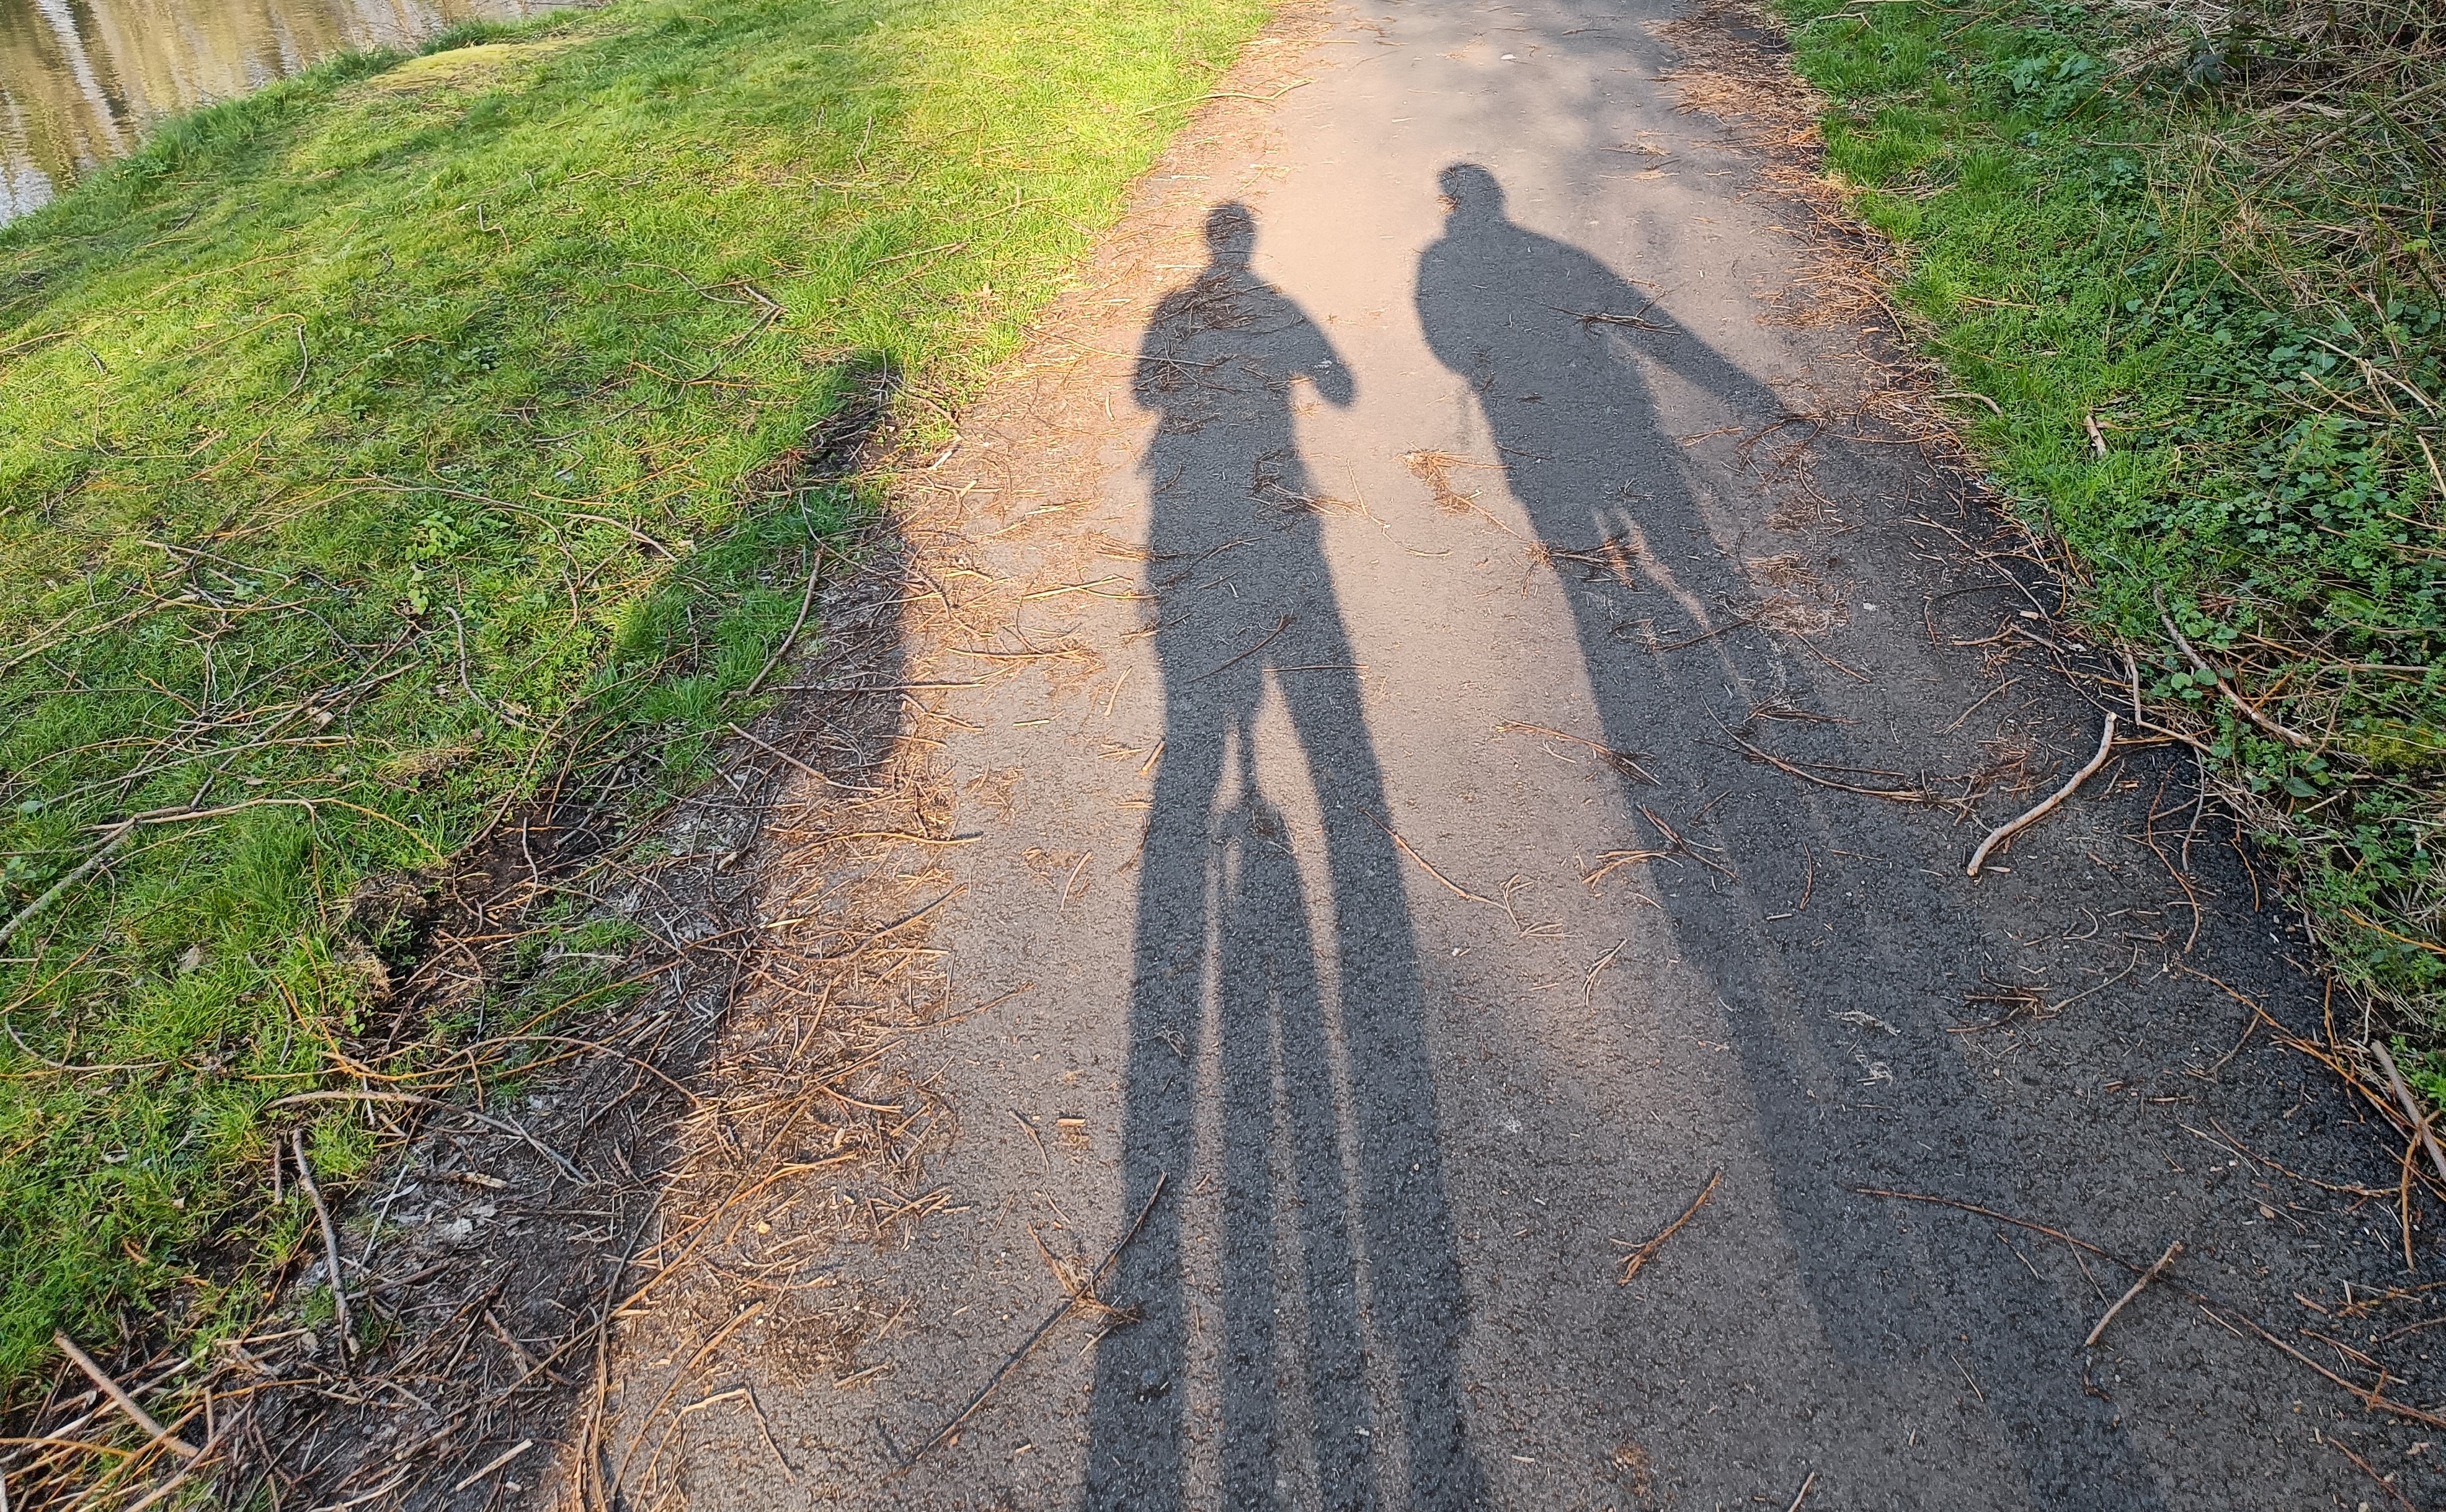 Shadows of three people riding unicycles